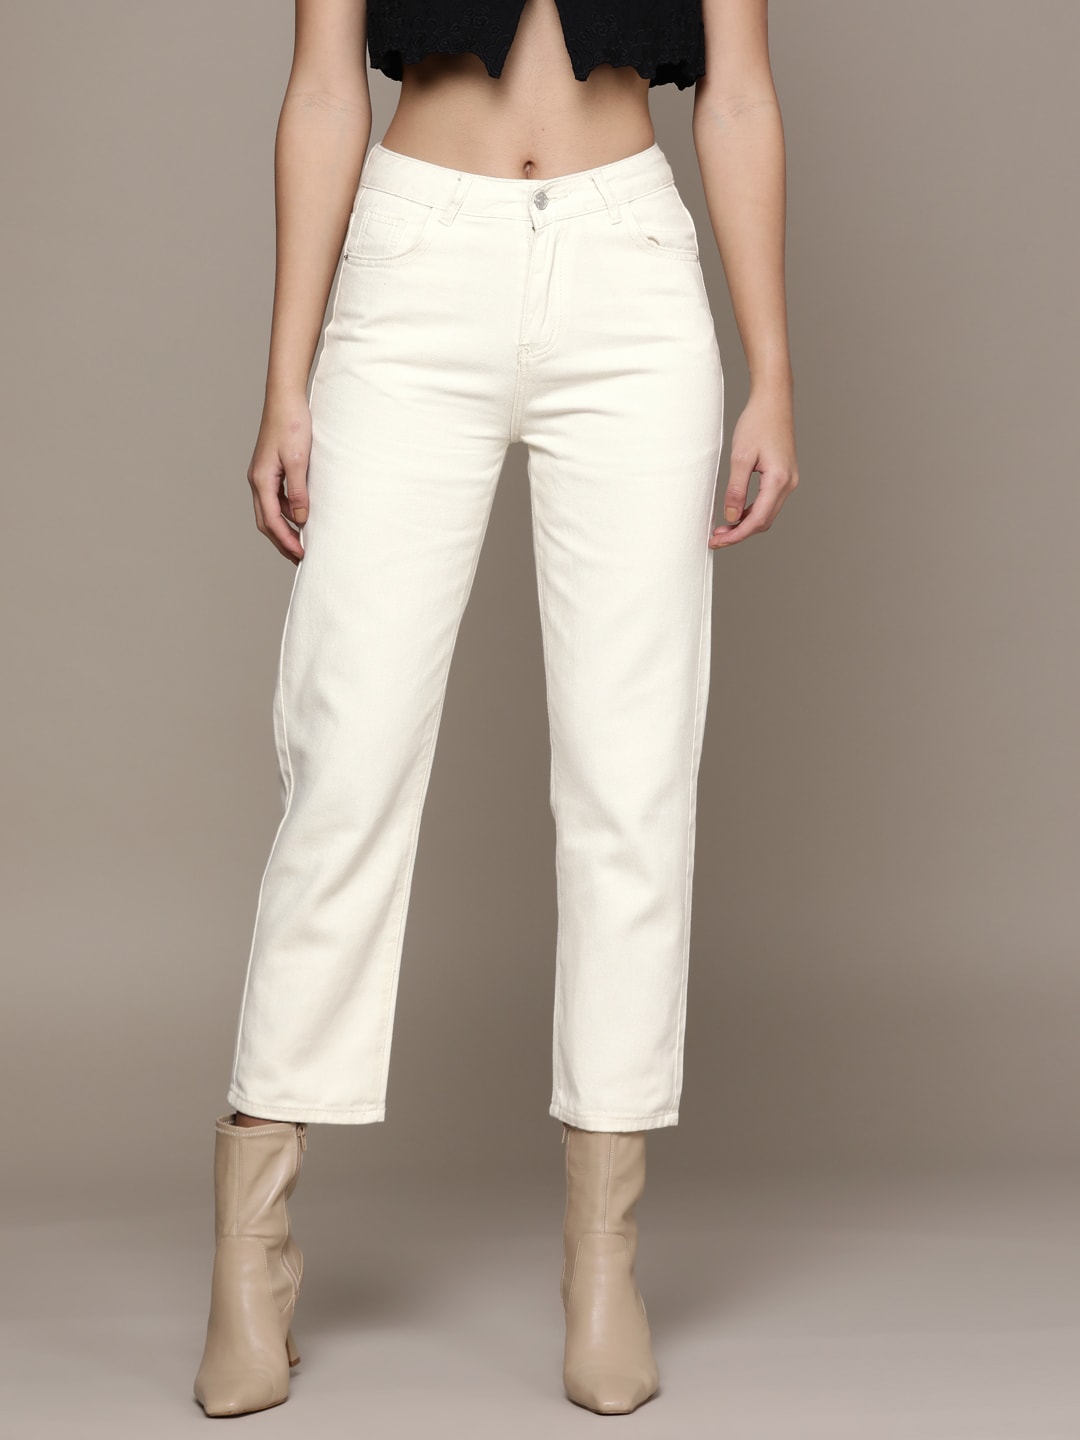 URBANIC Women Off-White Cotton Solid Cropped Jeans Price in India